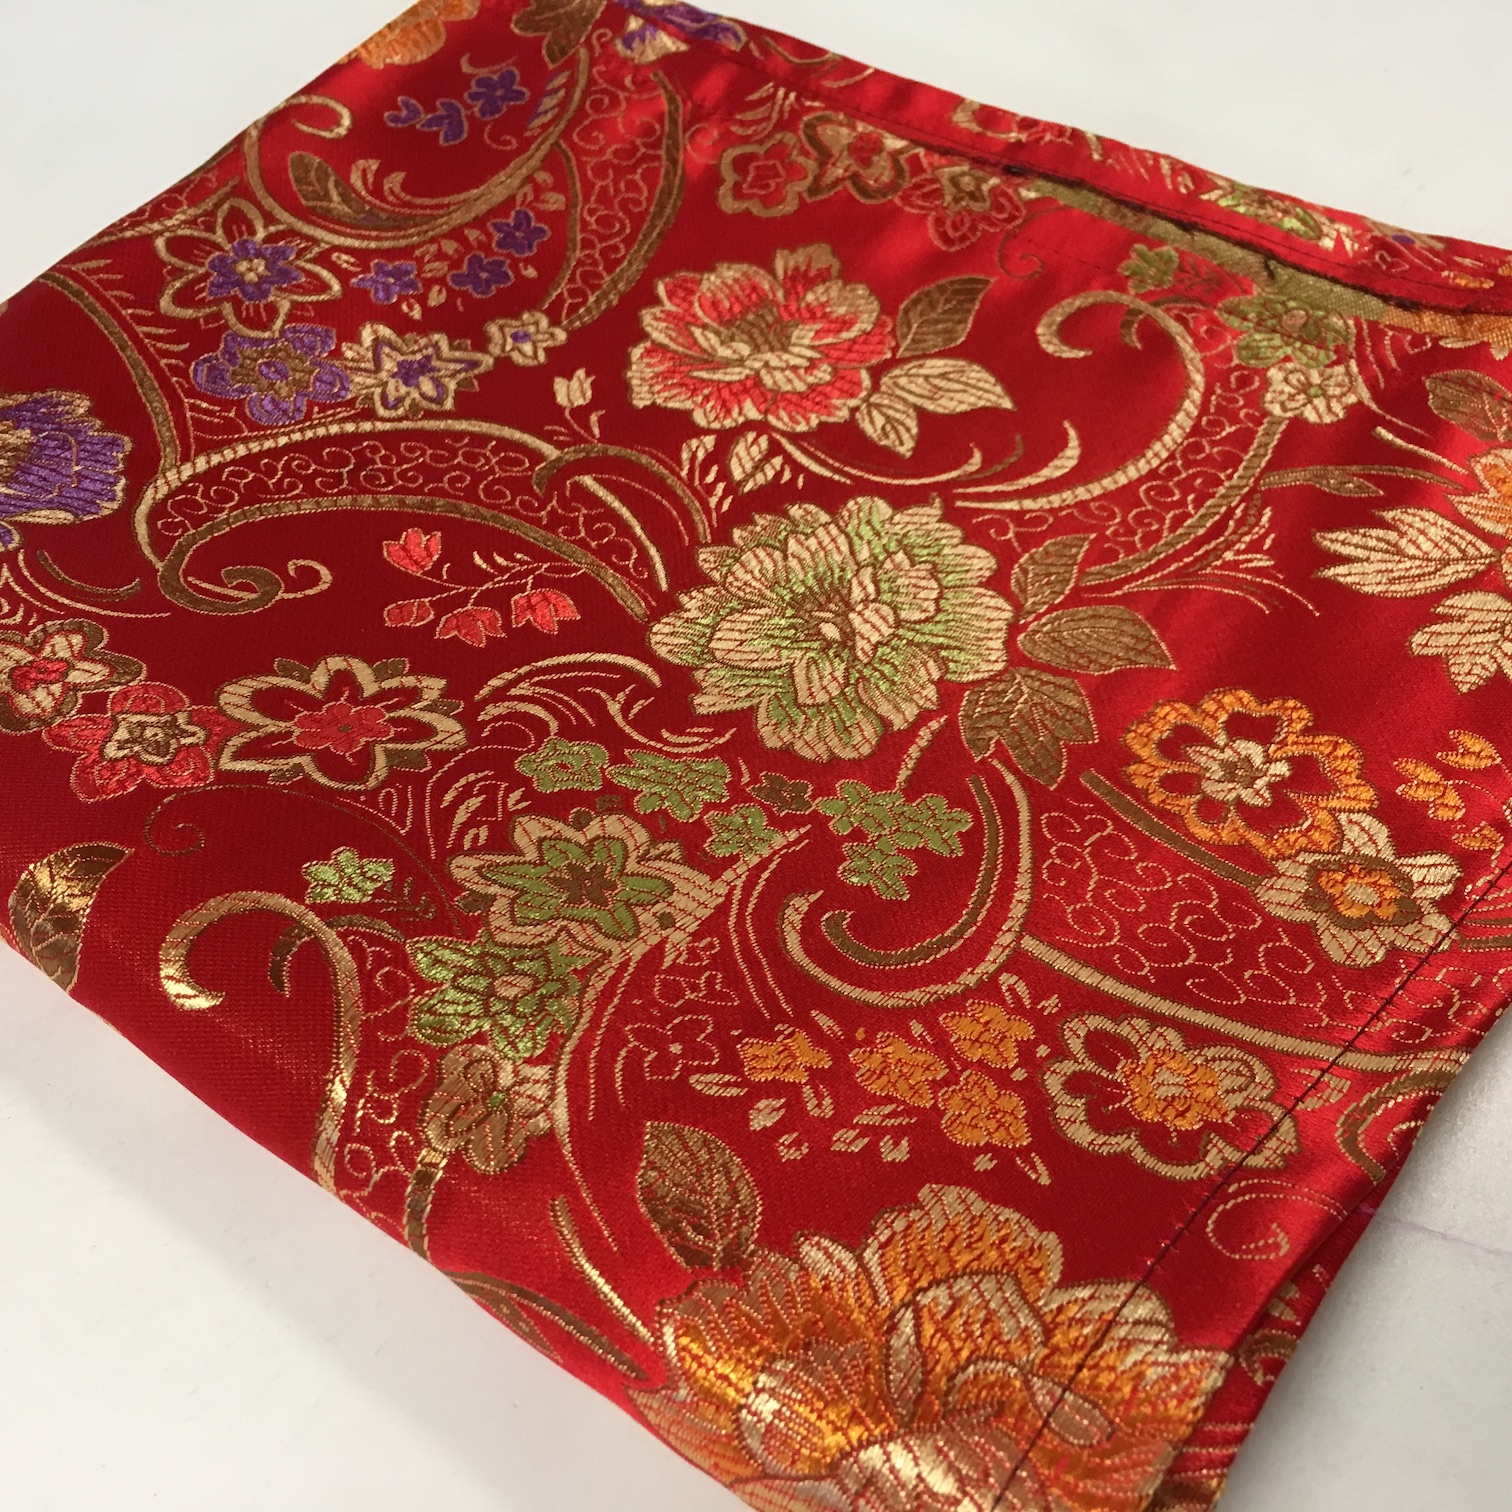 TABLECLOTH, Oriental Red Gold Floral 90cm x 60cm